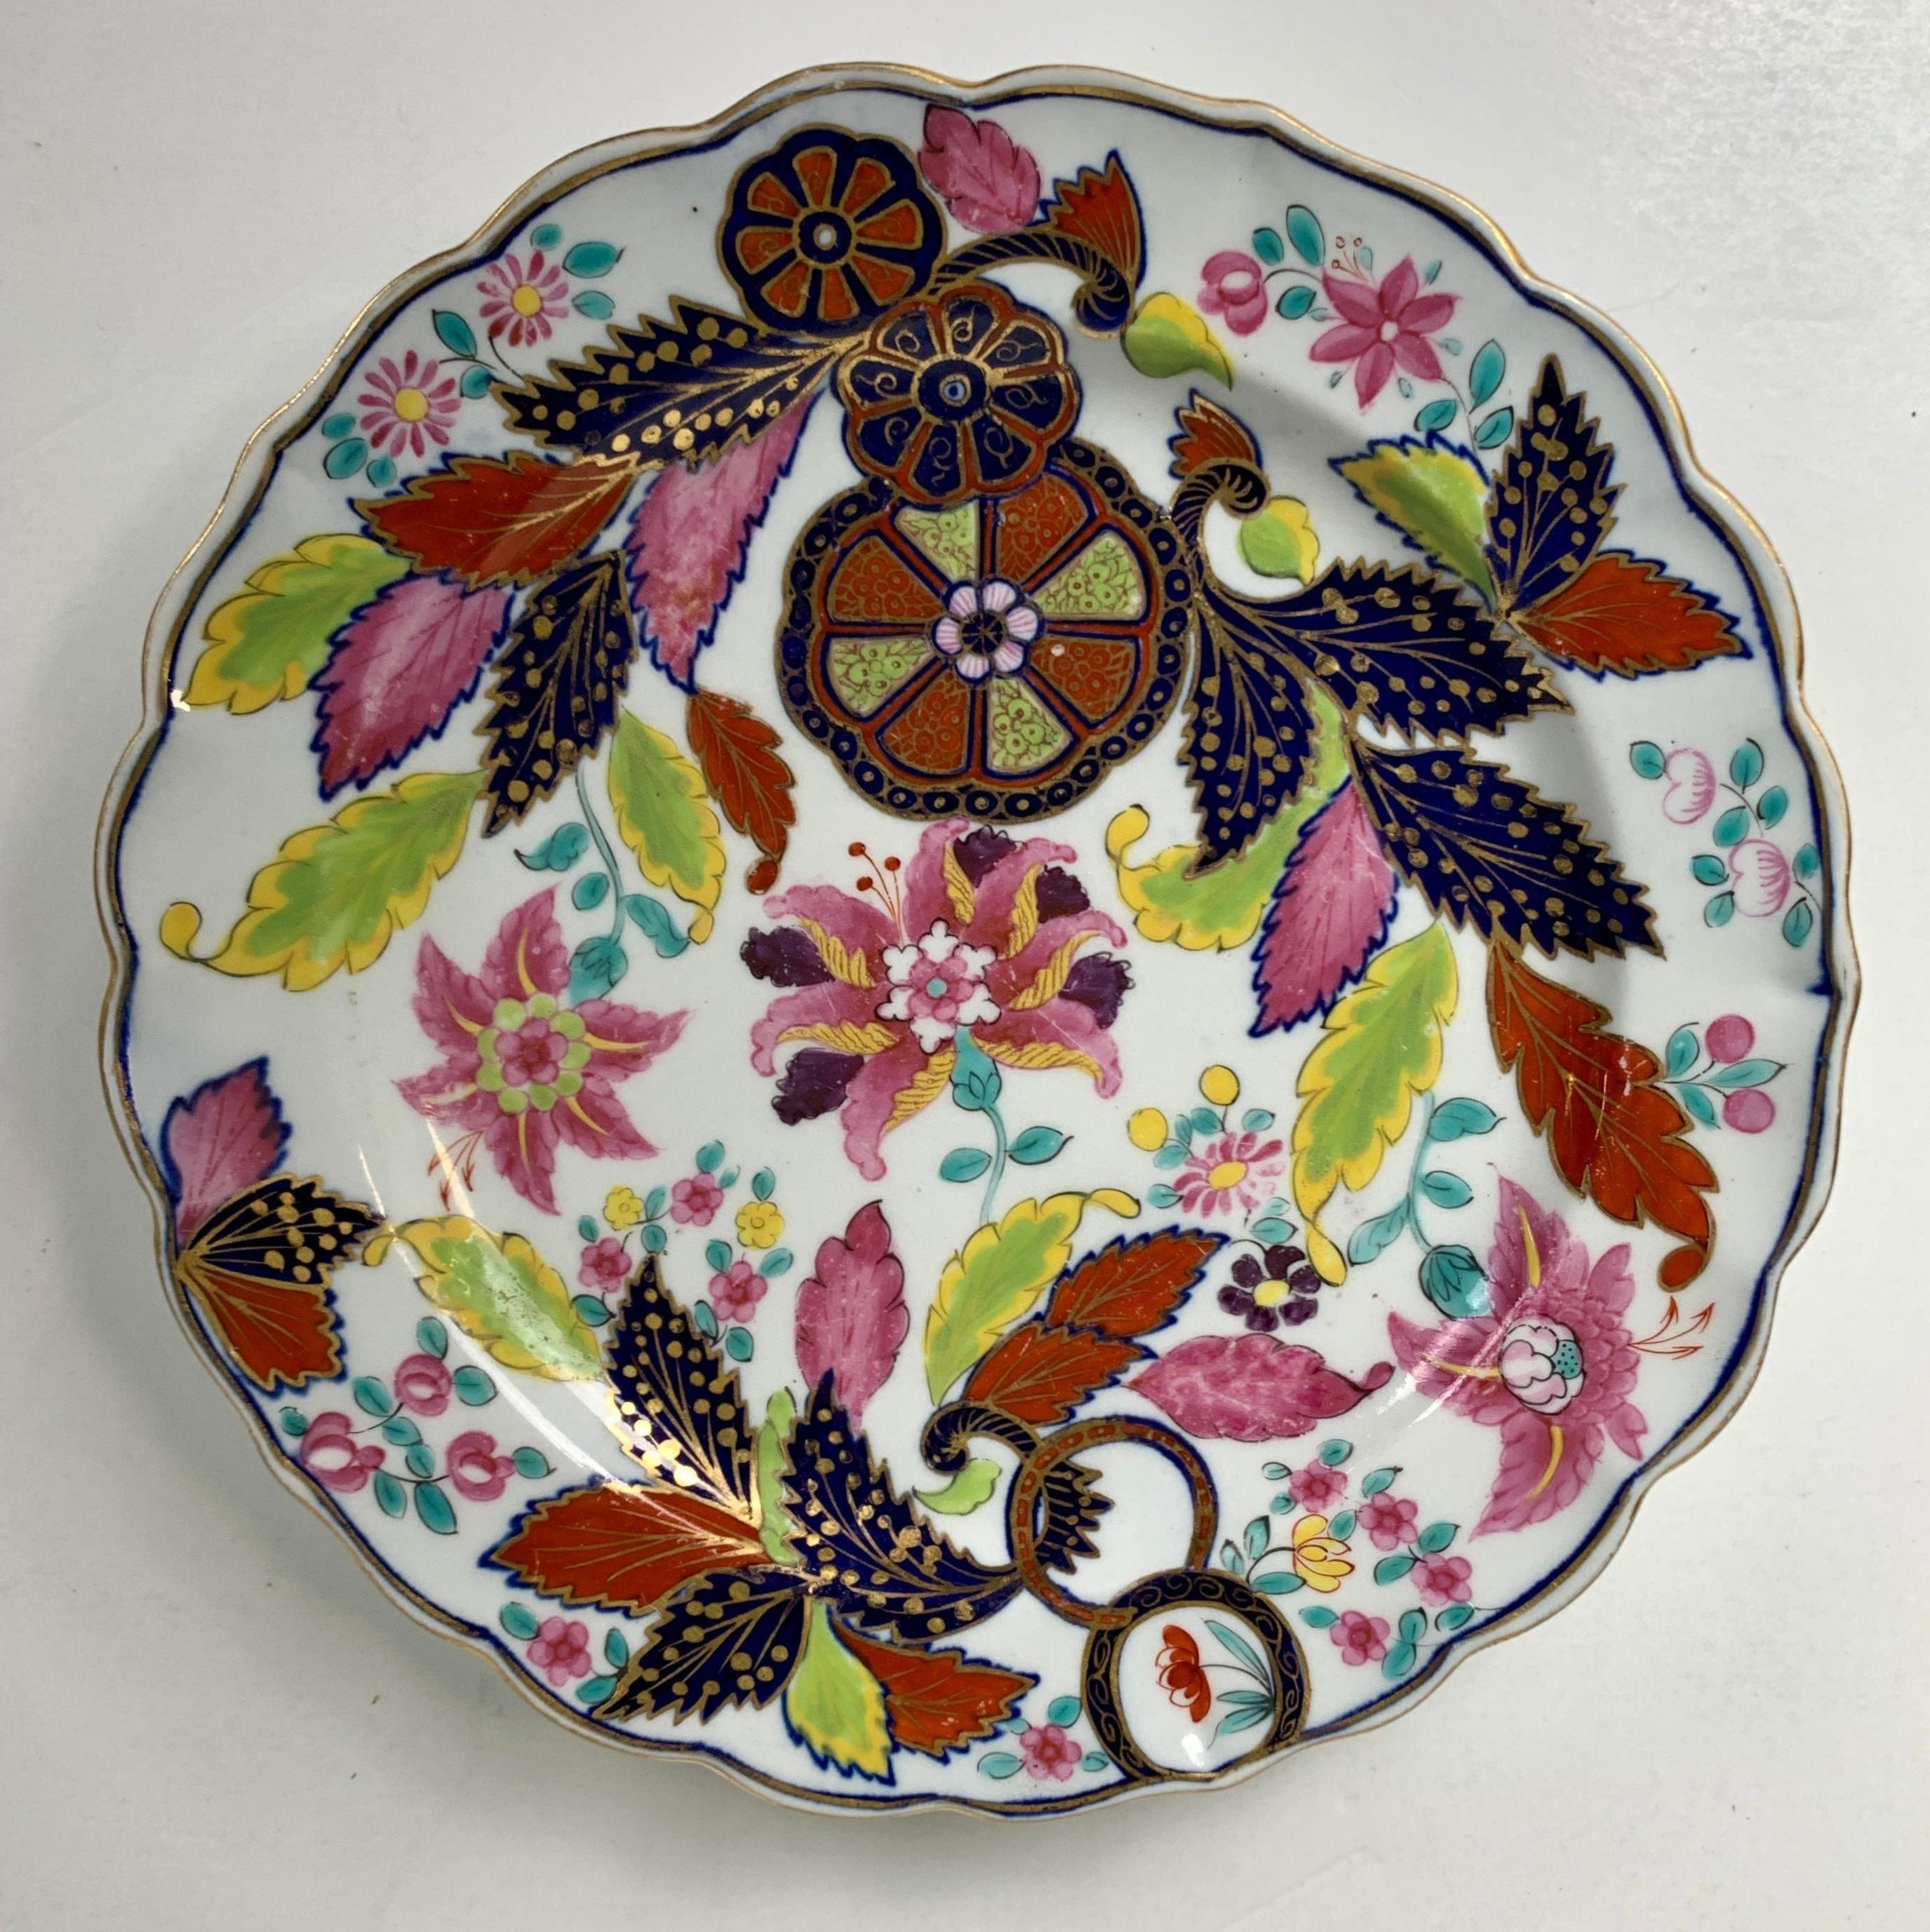 Provenance: The Private Collection of Mario Buatta 
This pair of small Chinese export porcelain dishes are hand-painted in the Tobacco Leaf pattern.
The dishes are gorgeous! Mario loved porcelain with well-painted flowers and unexpected color